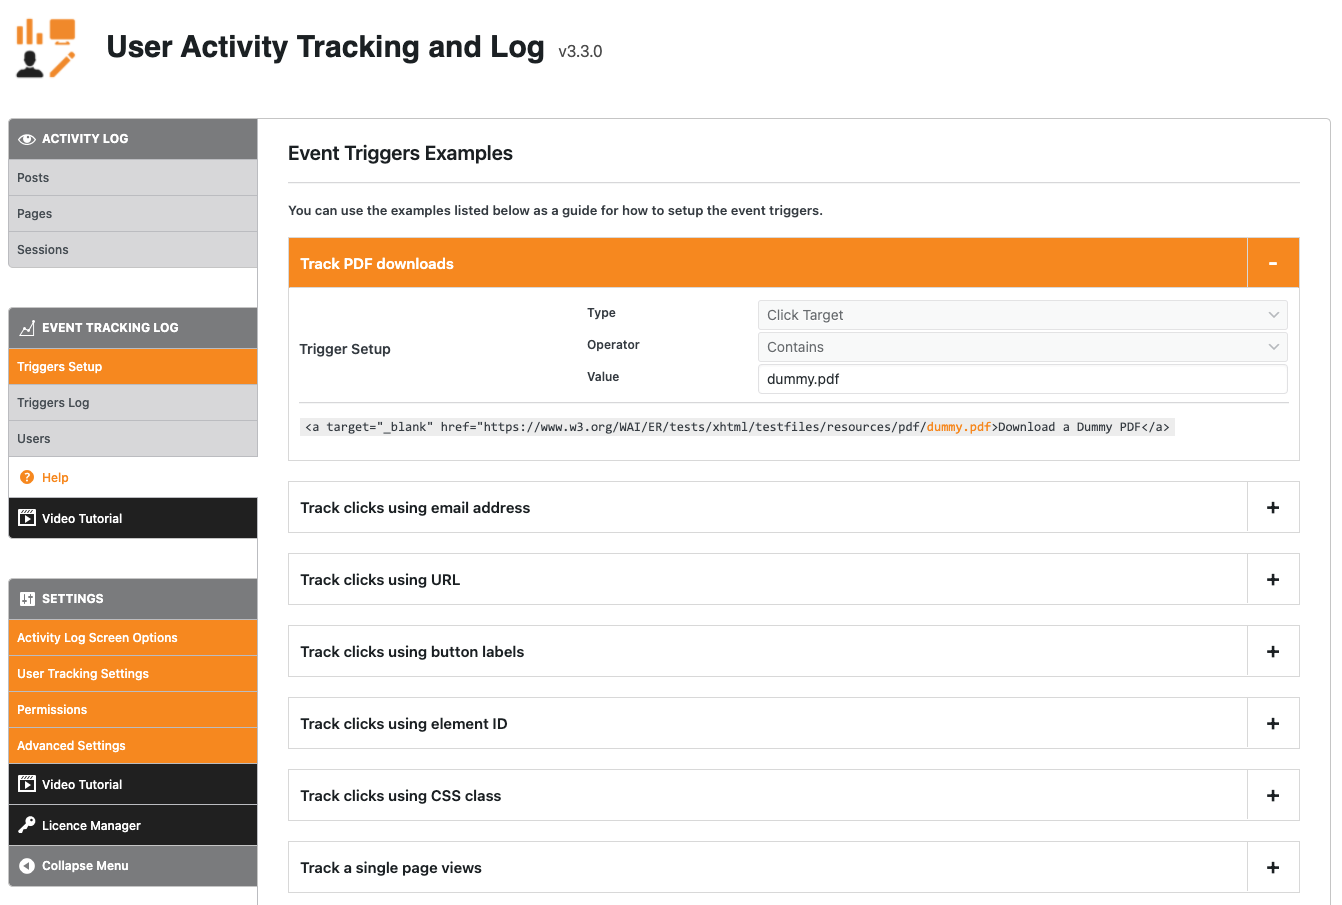 User Activity Tracking and Log - Permissions [Premium]